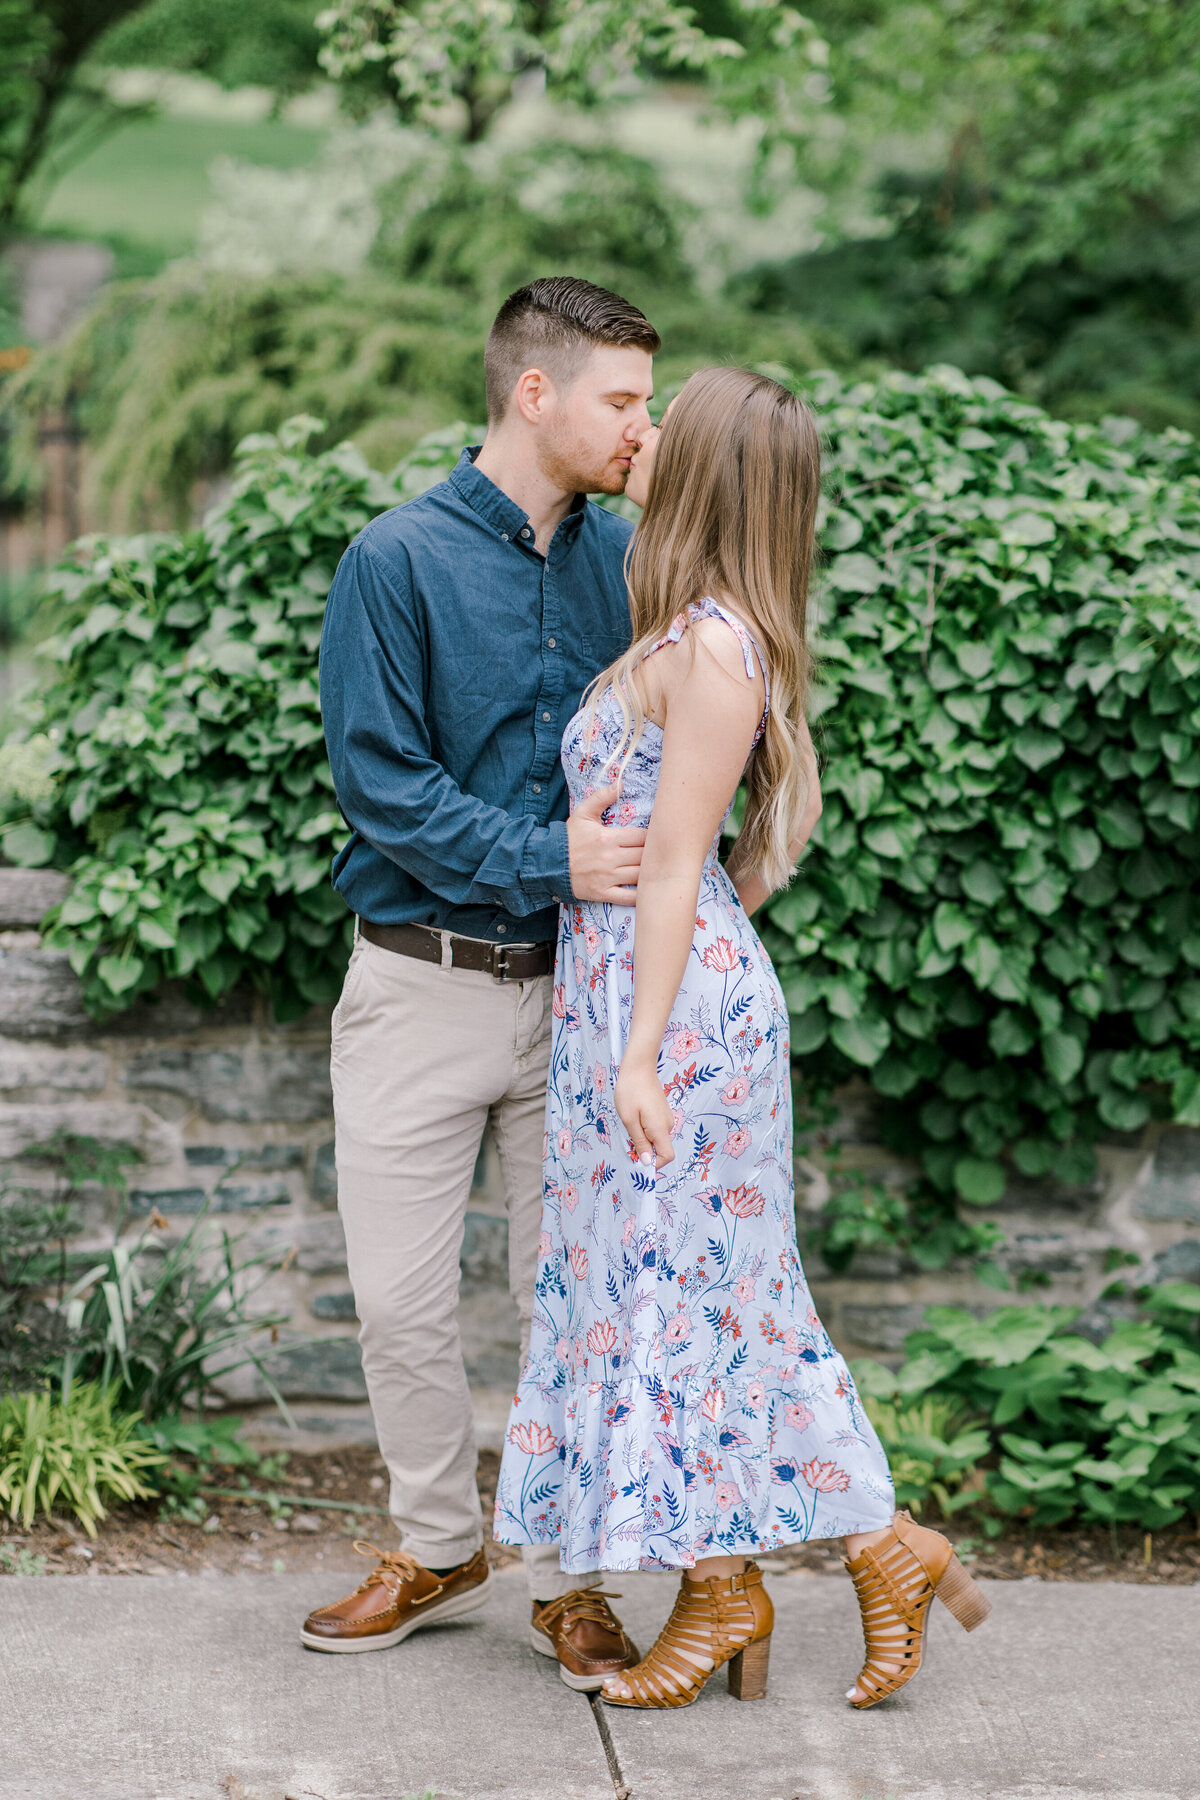 Hershey Garden Engagement Session Photography Photo-29